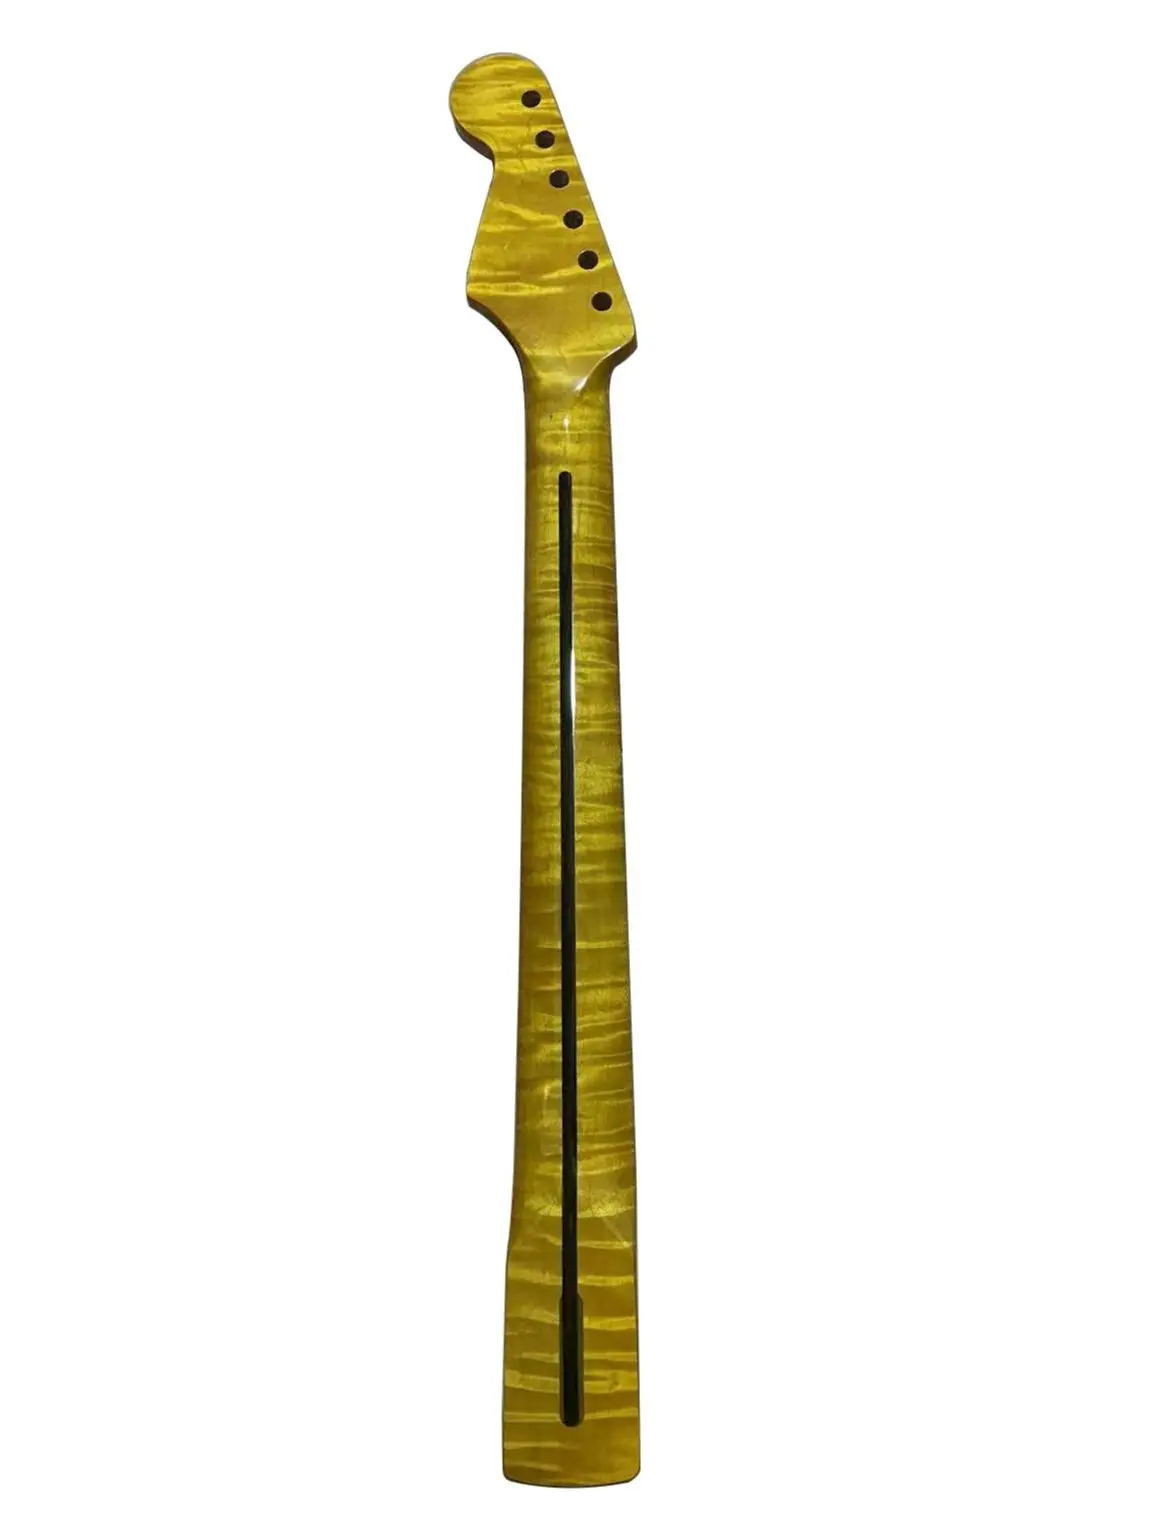 AAA Level 21Frets One Piece Tiger Flame Material Maple Glossy Yellow Paint ST Electric Guitar Neck Replacement Accessories Parts enlarge